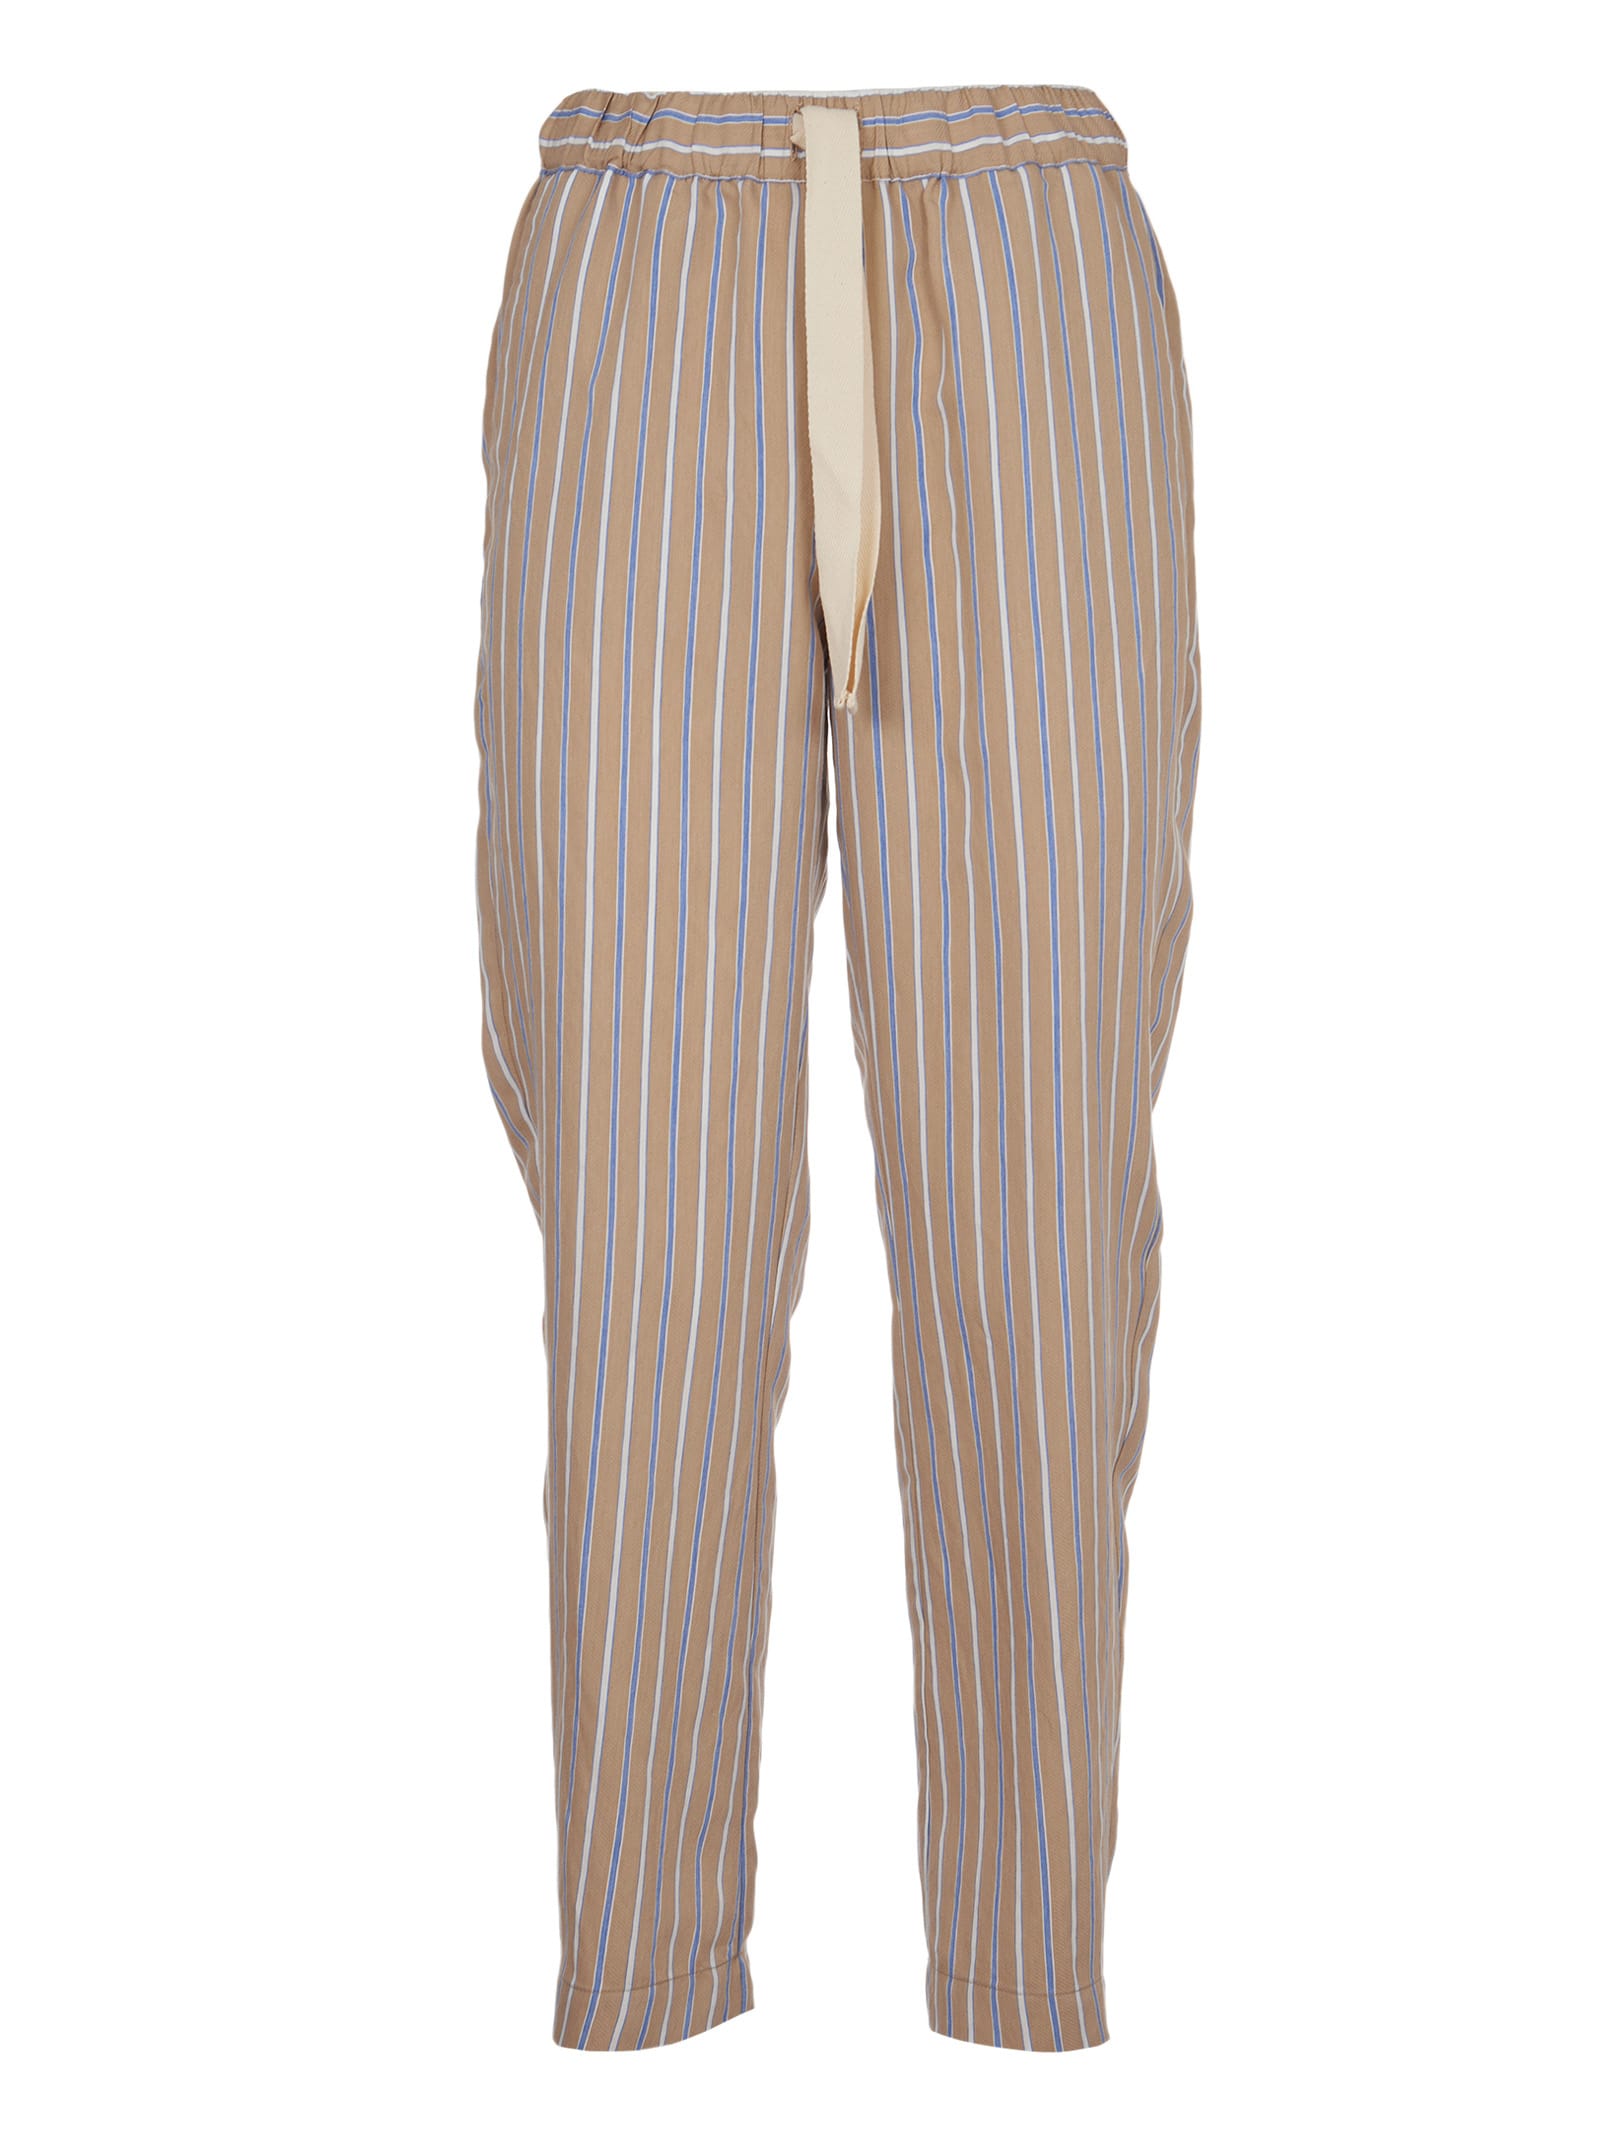 SEMICOUTURE Striped Trousers